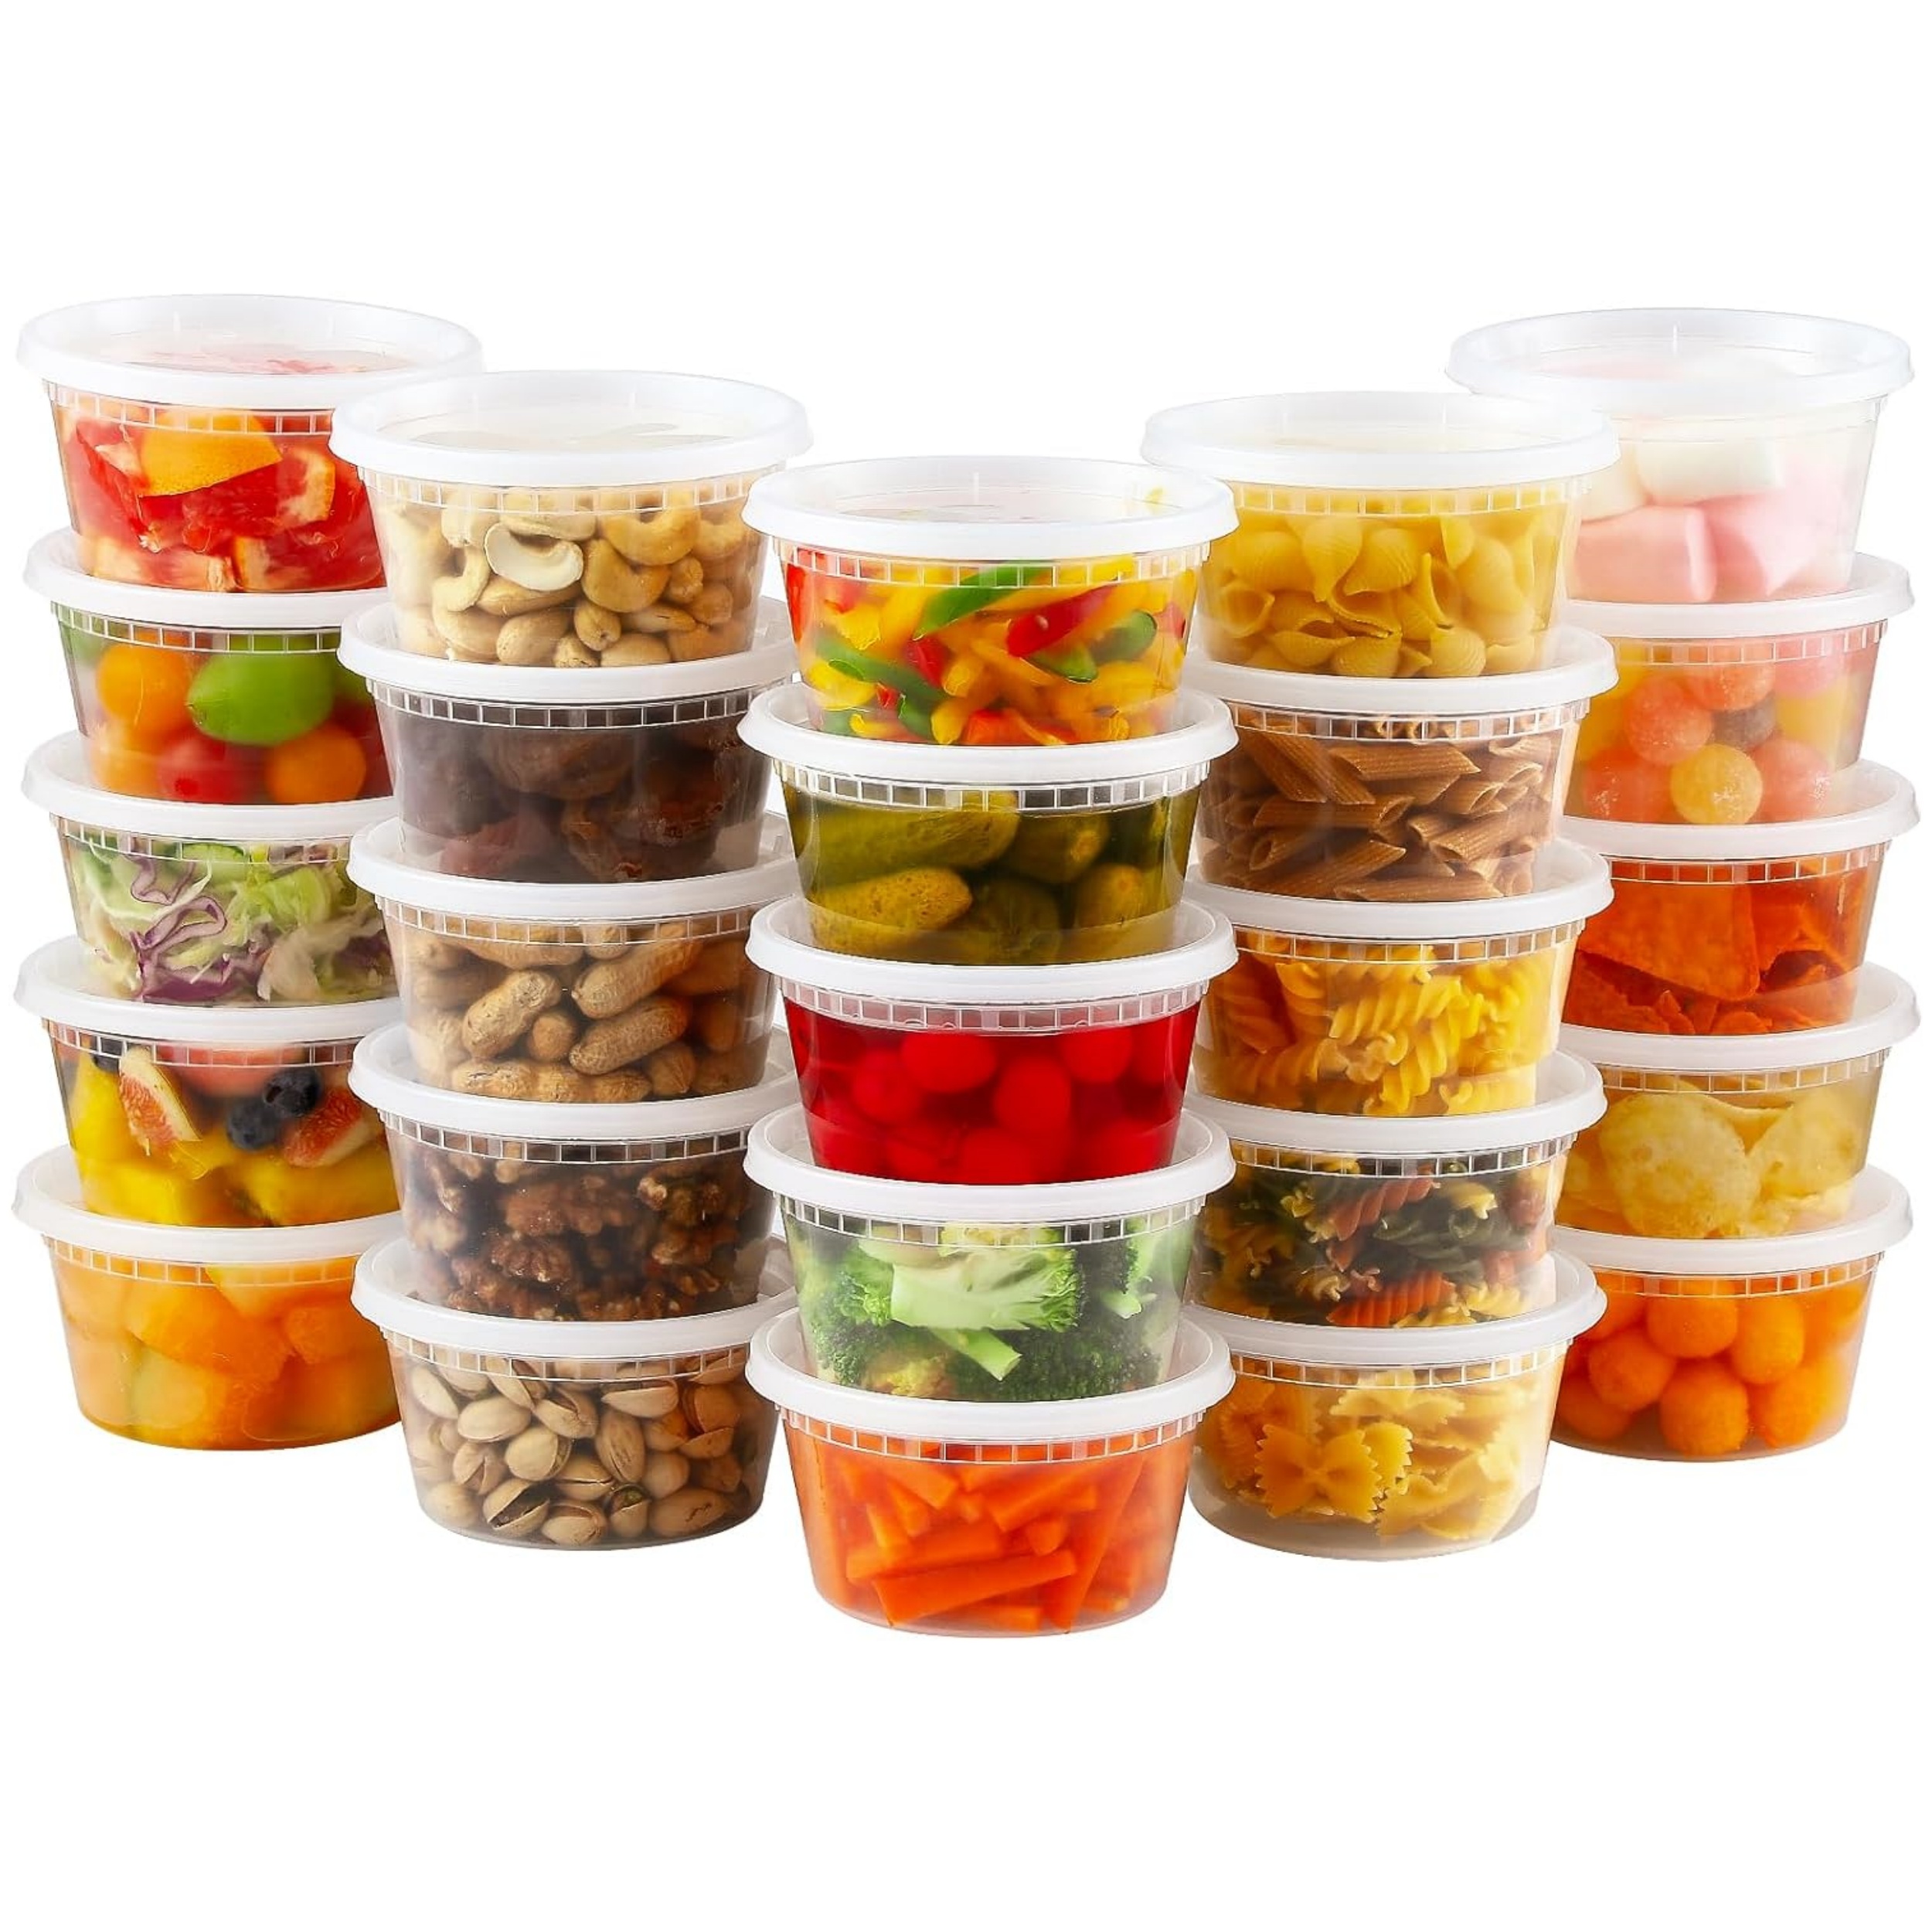 

24 Sets, 12 Oz Plastic Food Containers With Lids, Airtight Food Storage Containers, Freezer/dishwasher/microwave Safe, Soup Containers For Takeout Meal Prep Storage, Kitchen Accessaries, Home Items